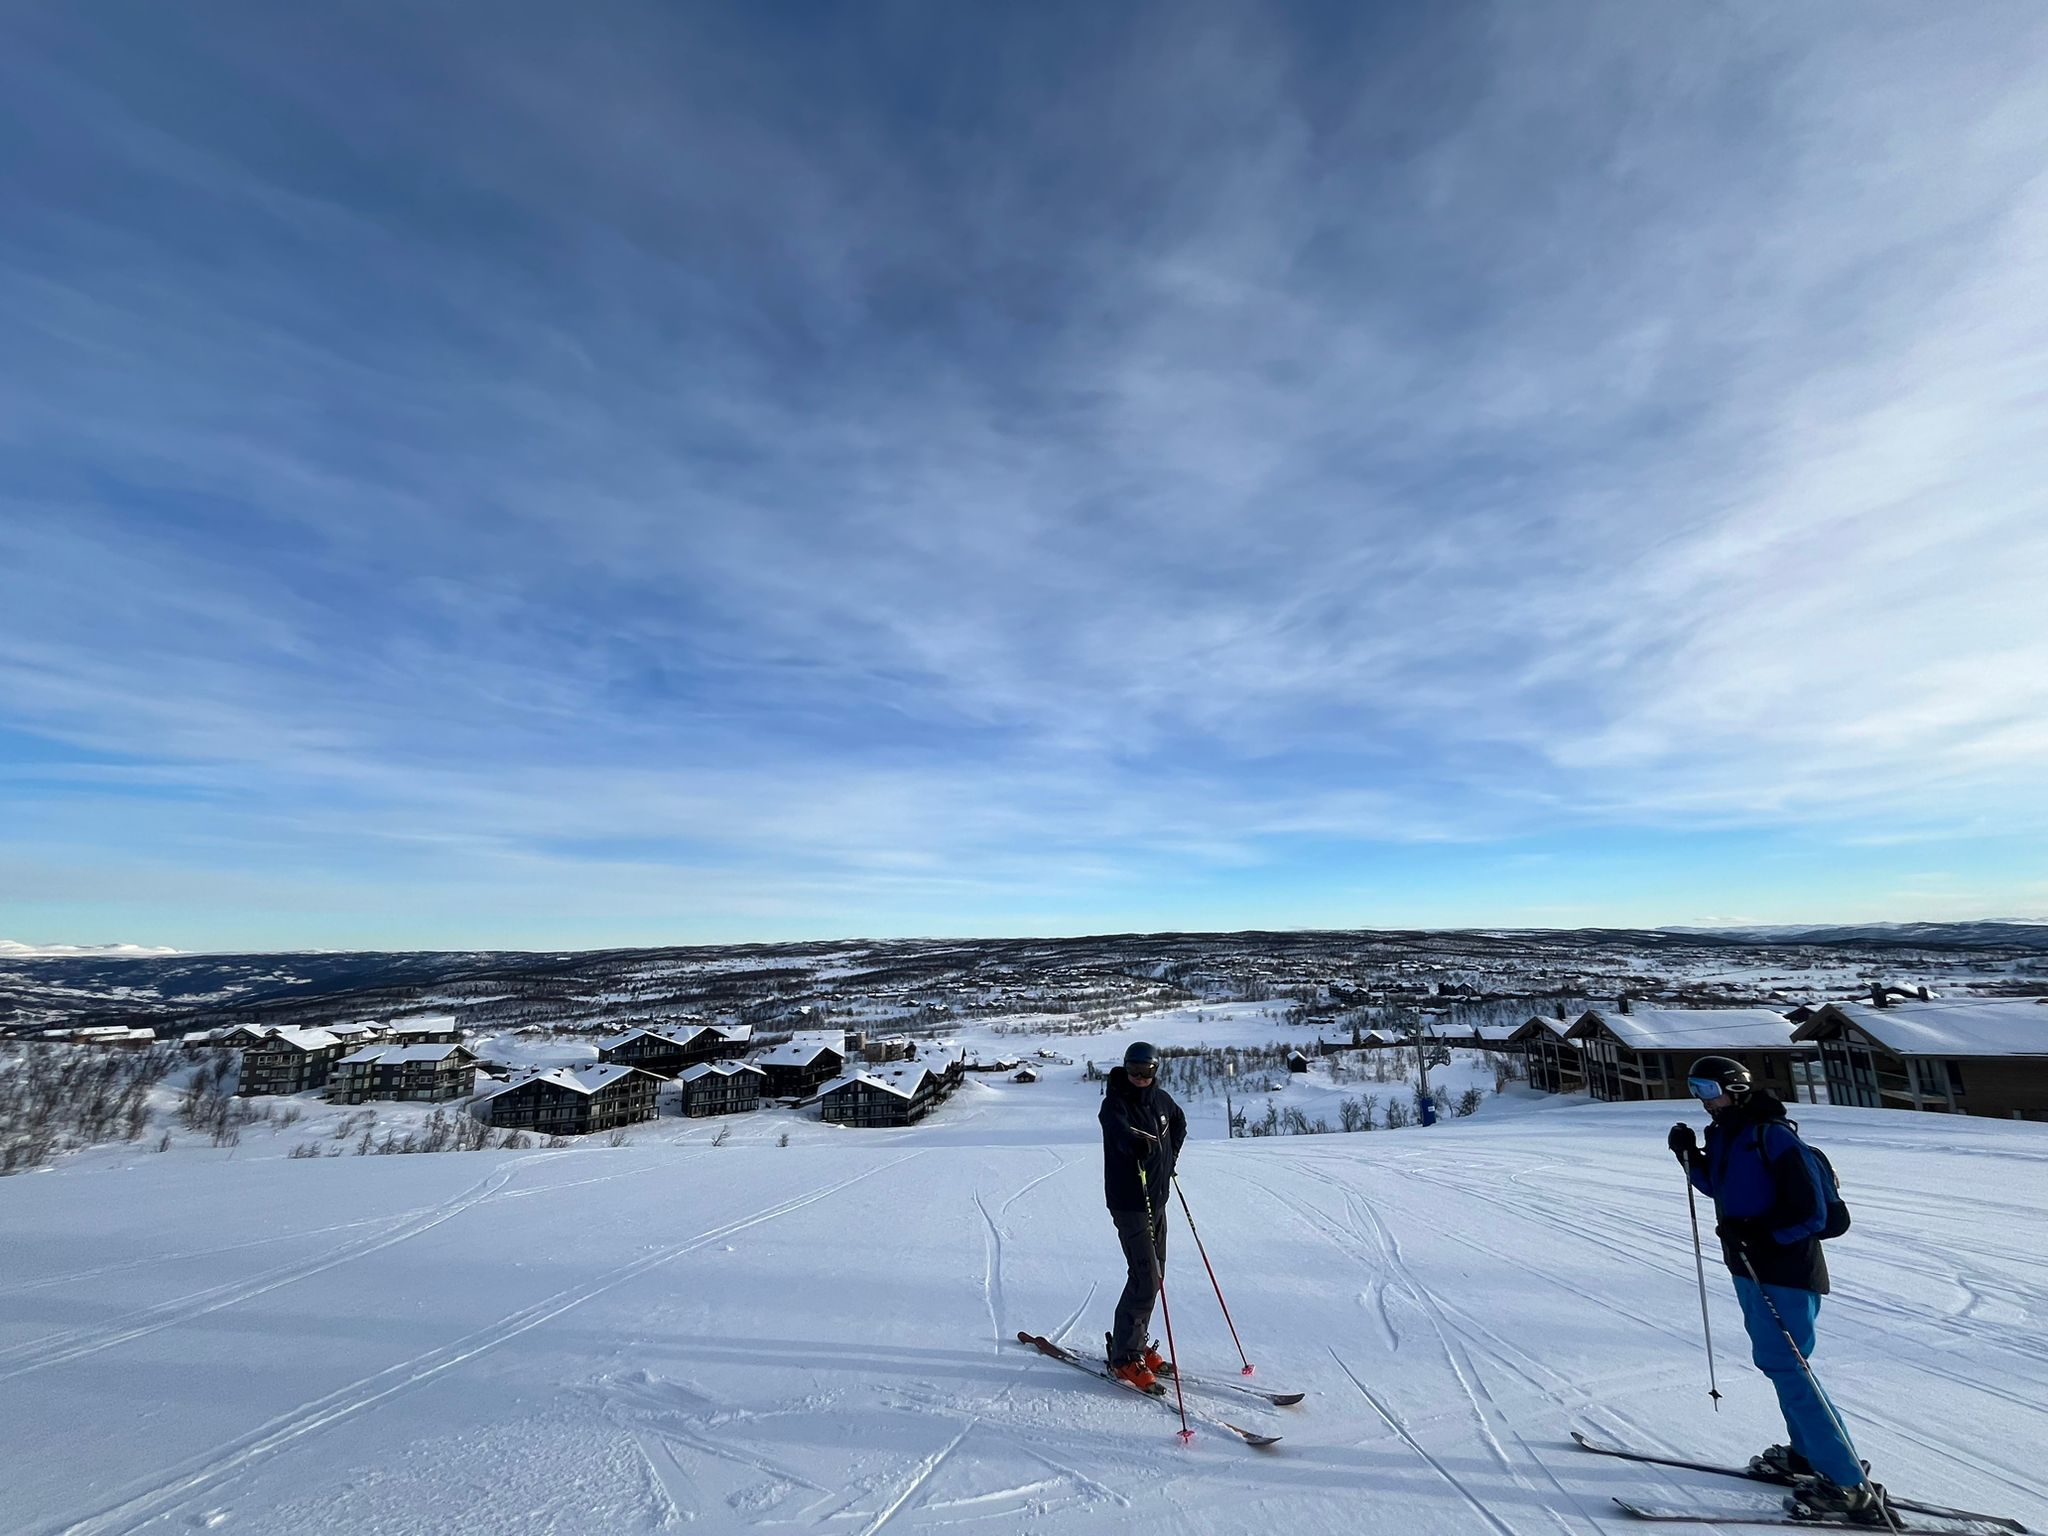 Skiing in Geilo is perfect for families and beginners, with lots of long green and blue runs